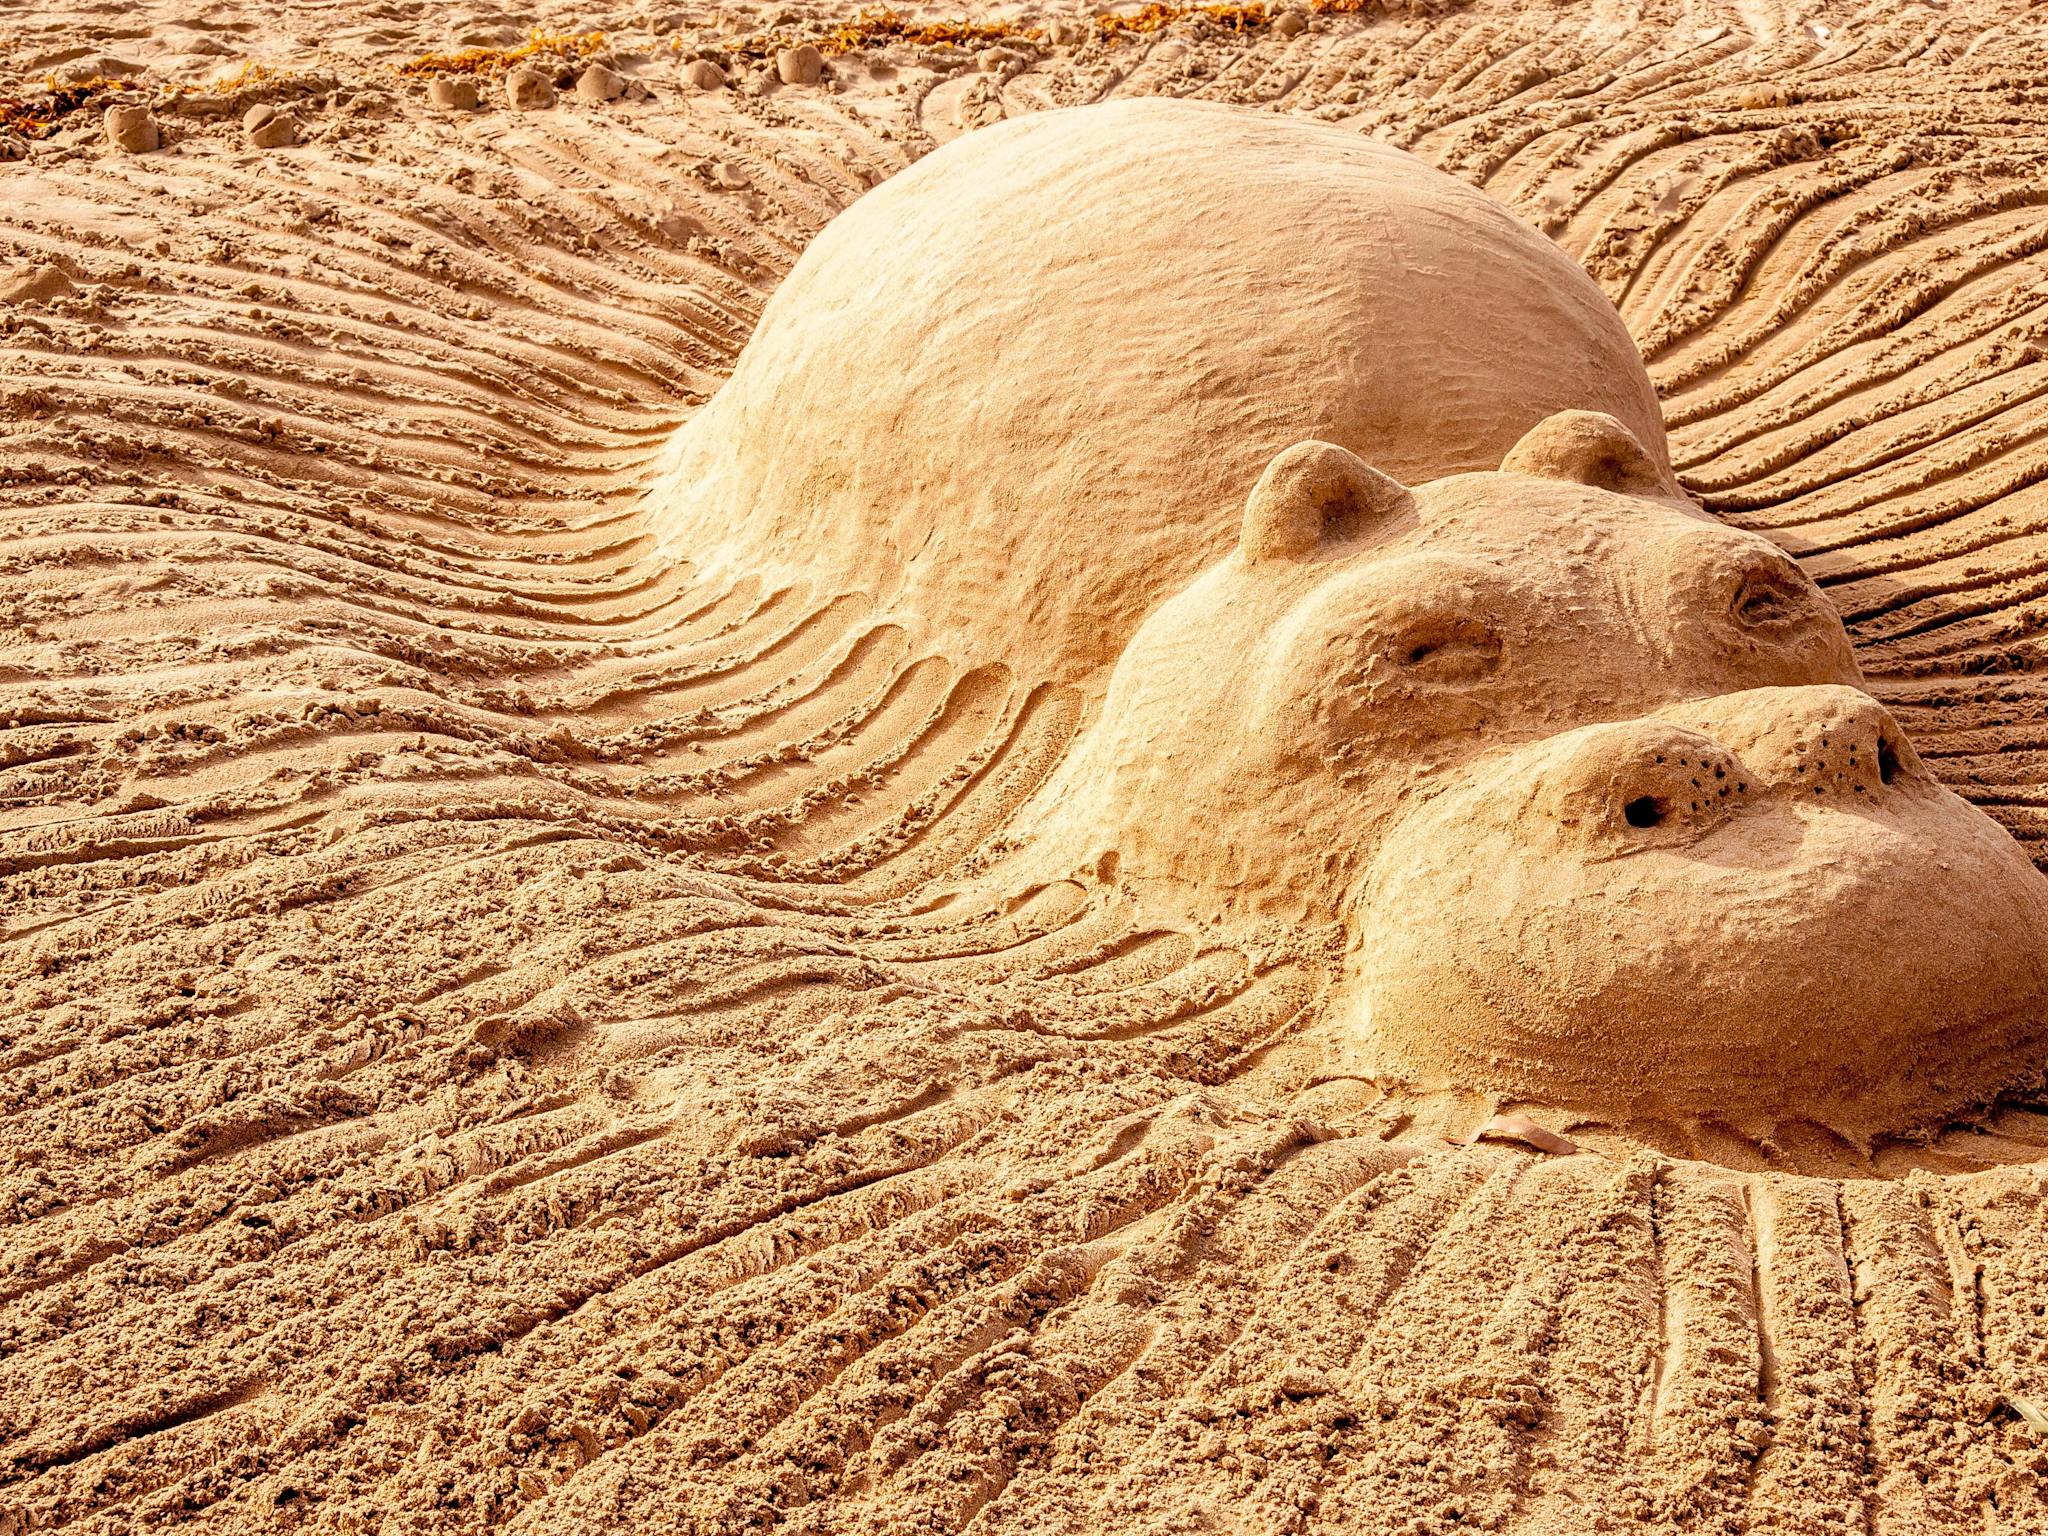 Sand sculpture of a hippo